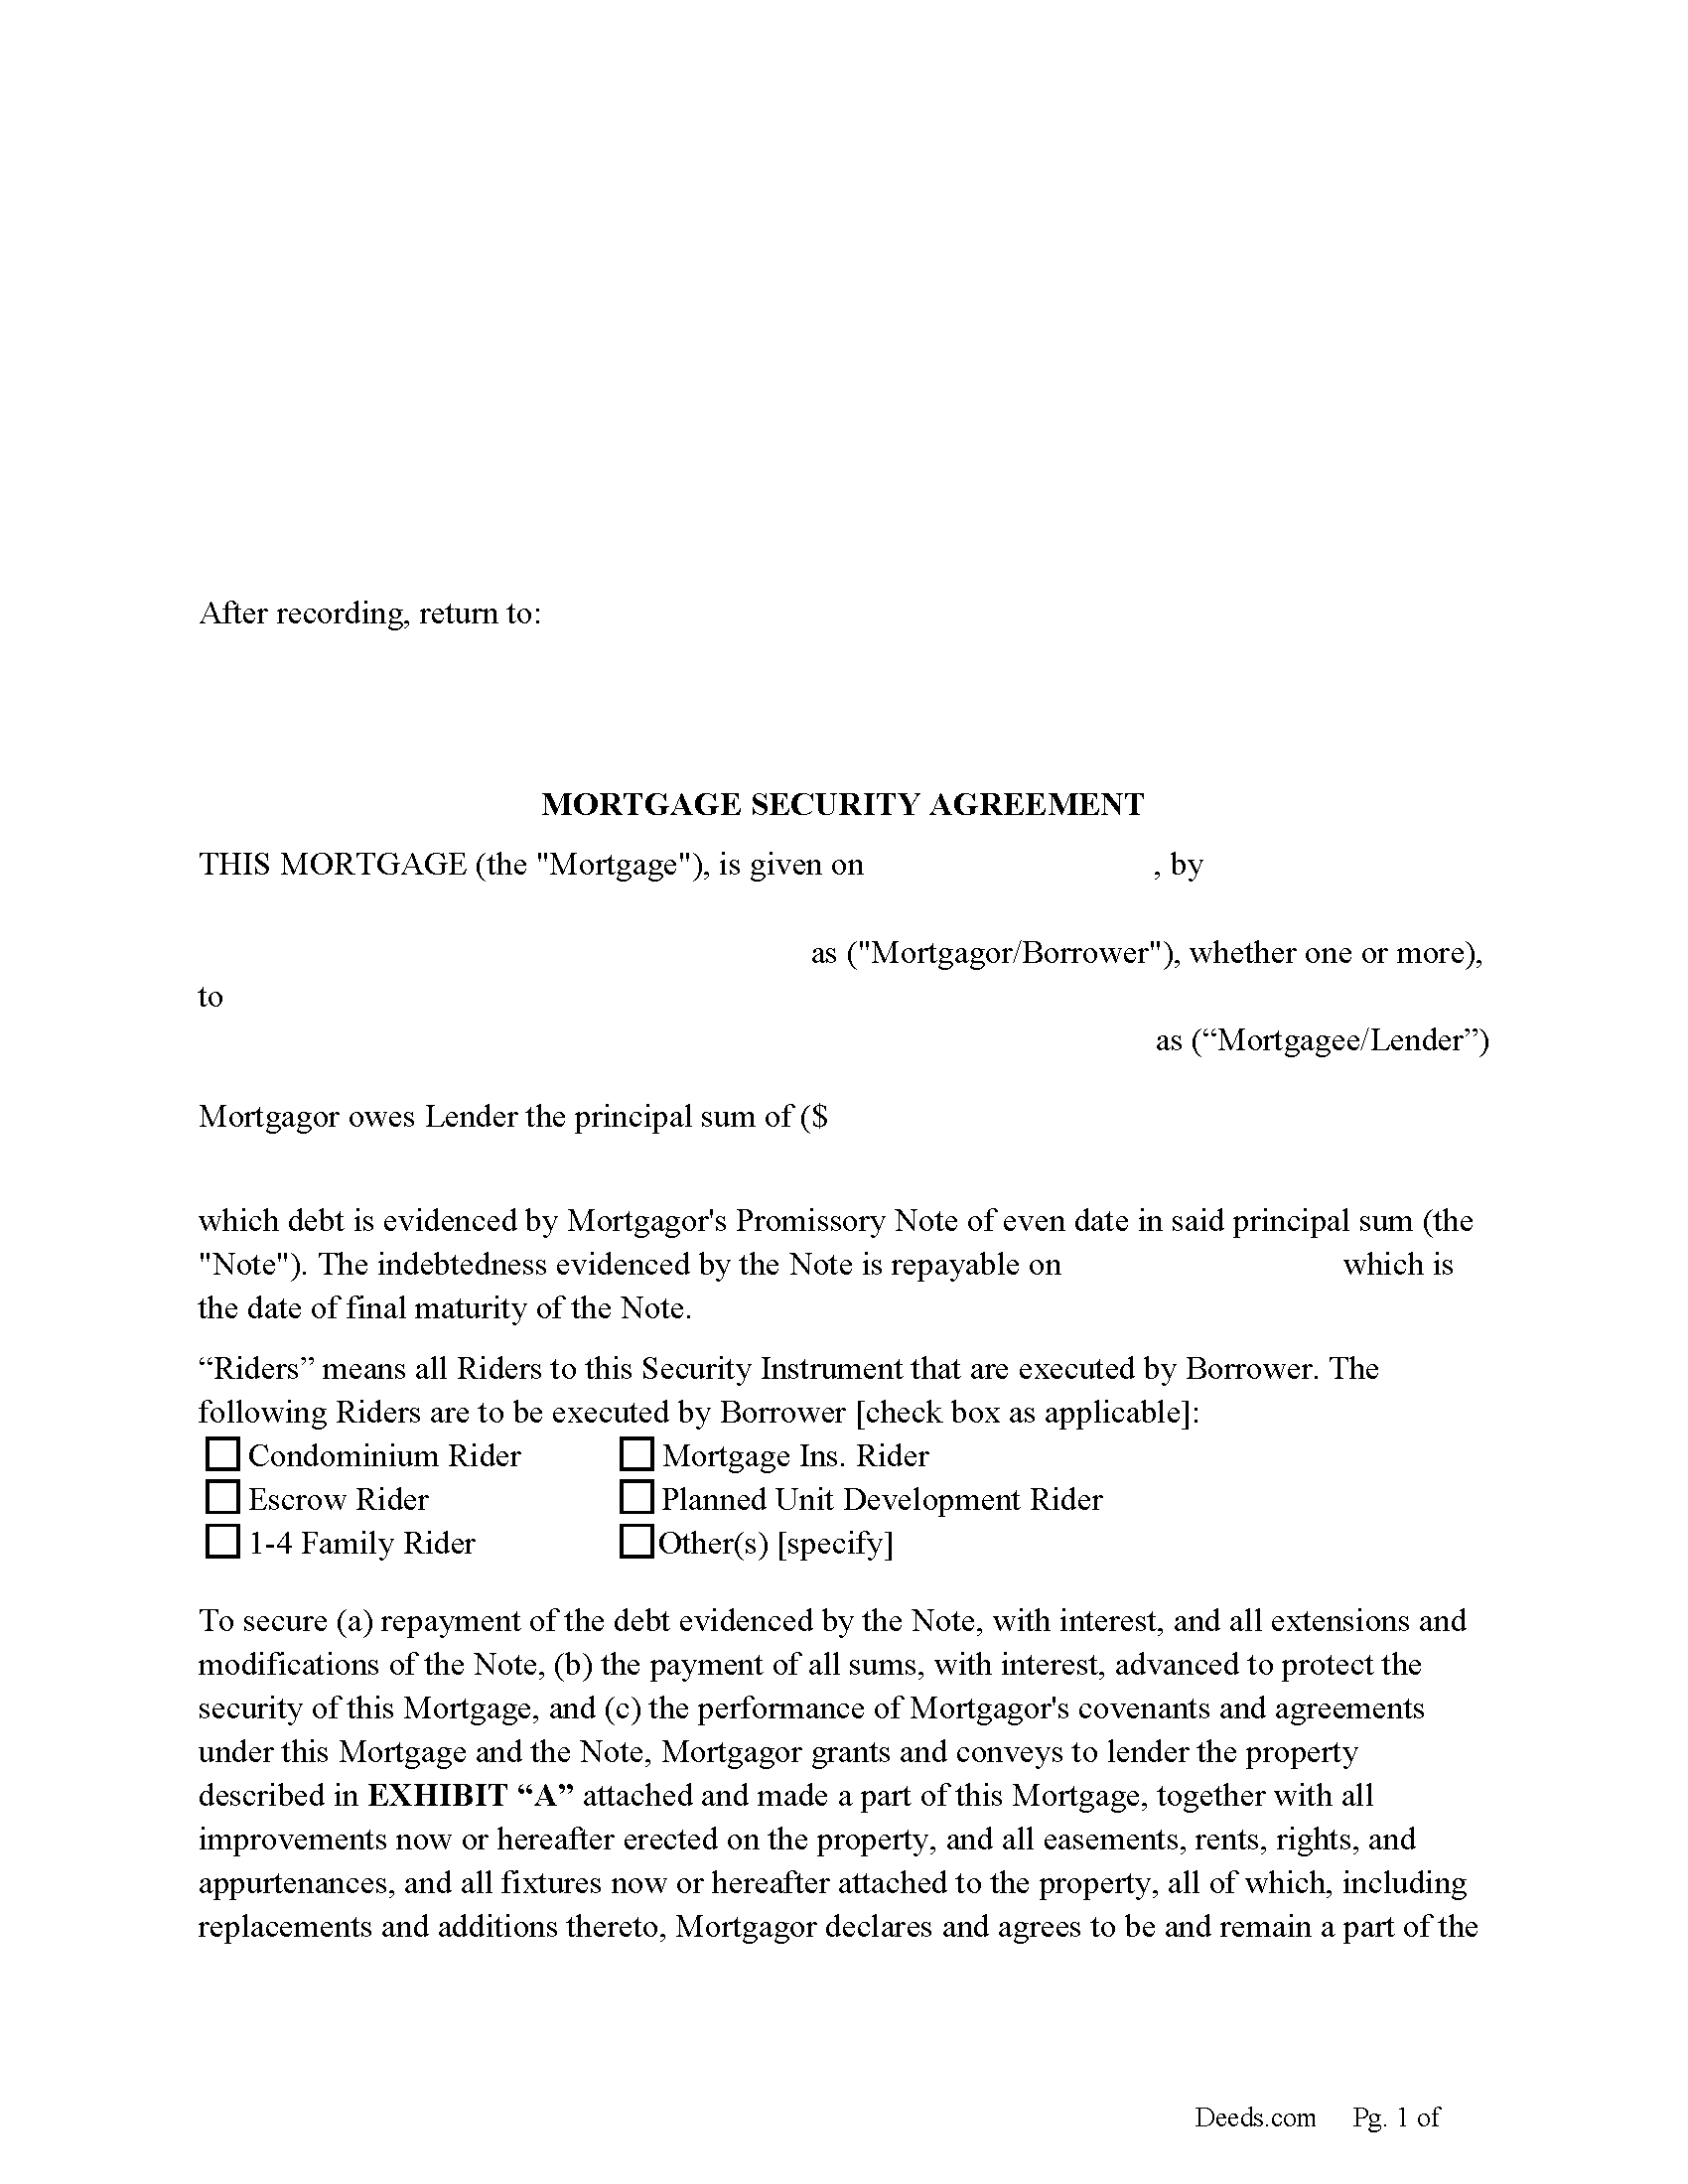 Mortgage Security Agreement and Promissory Note